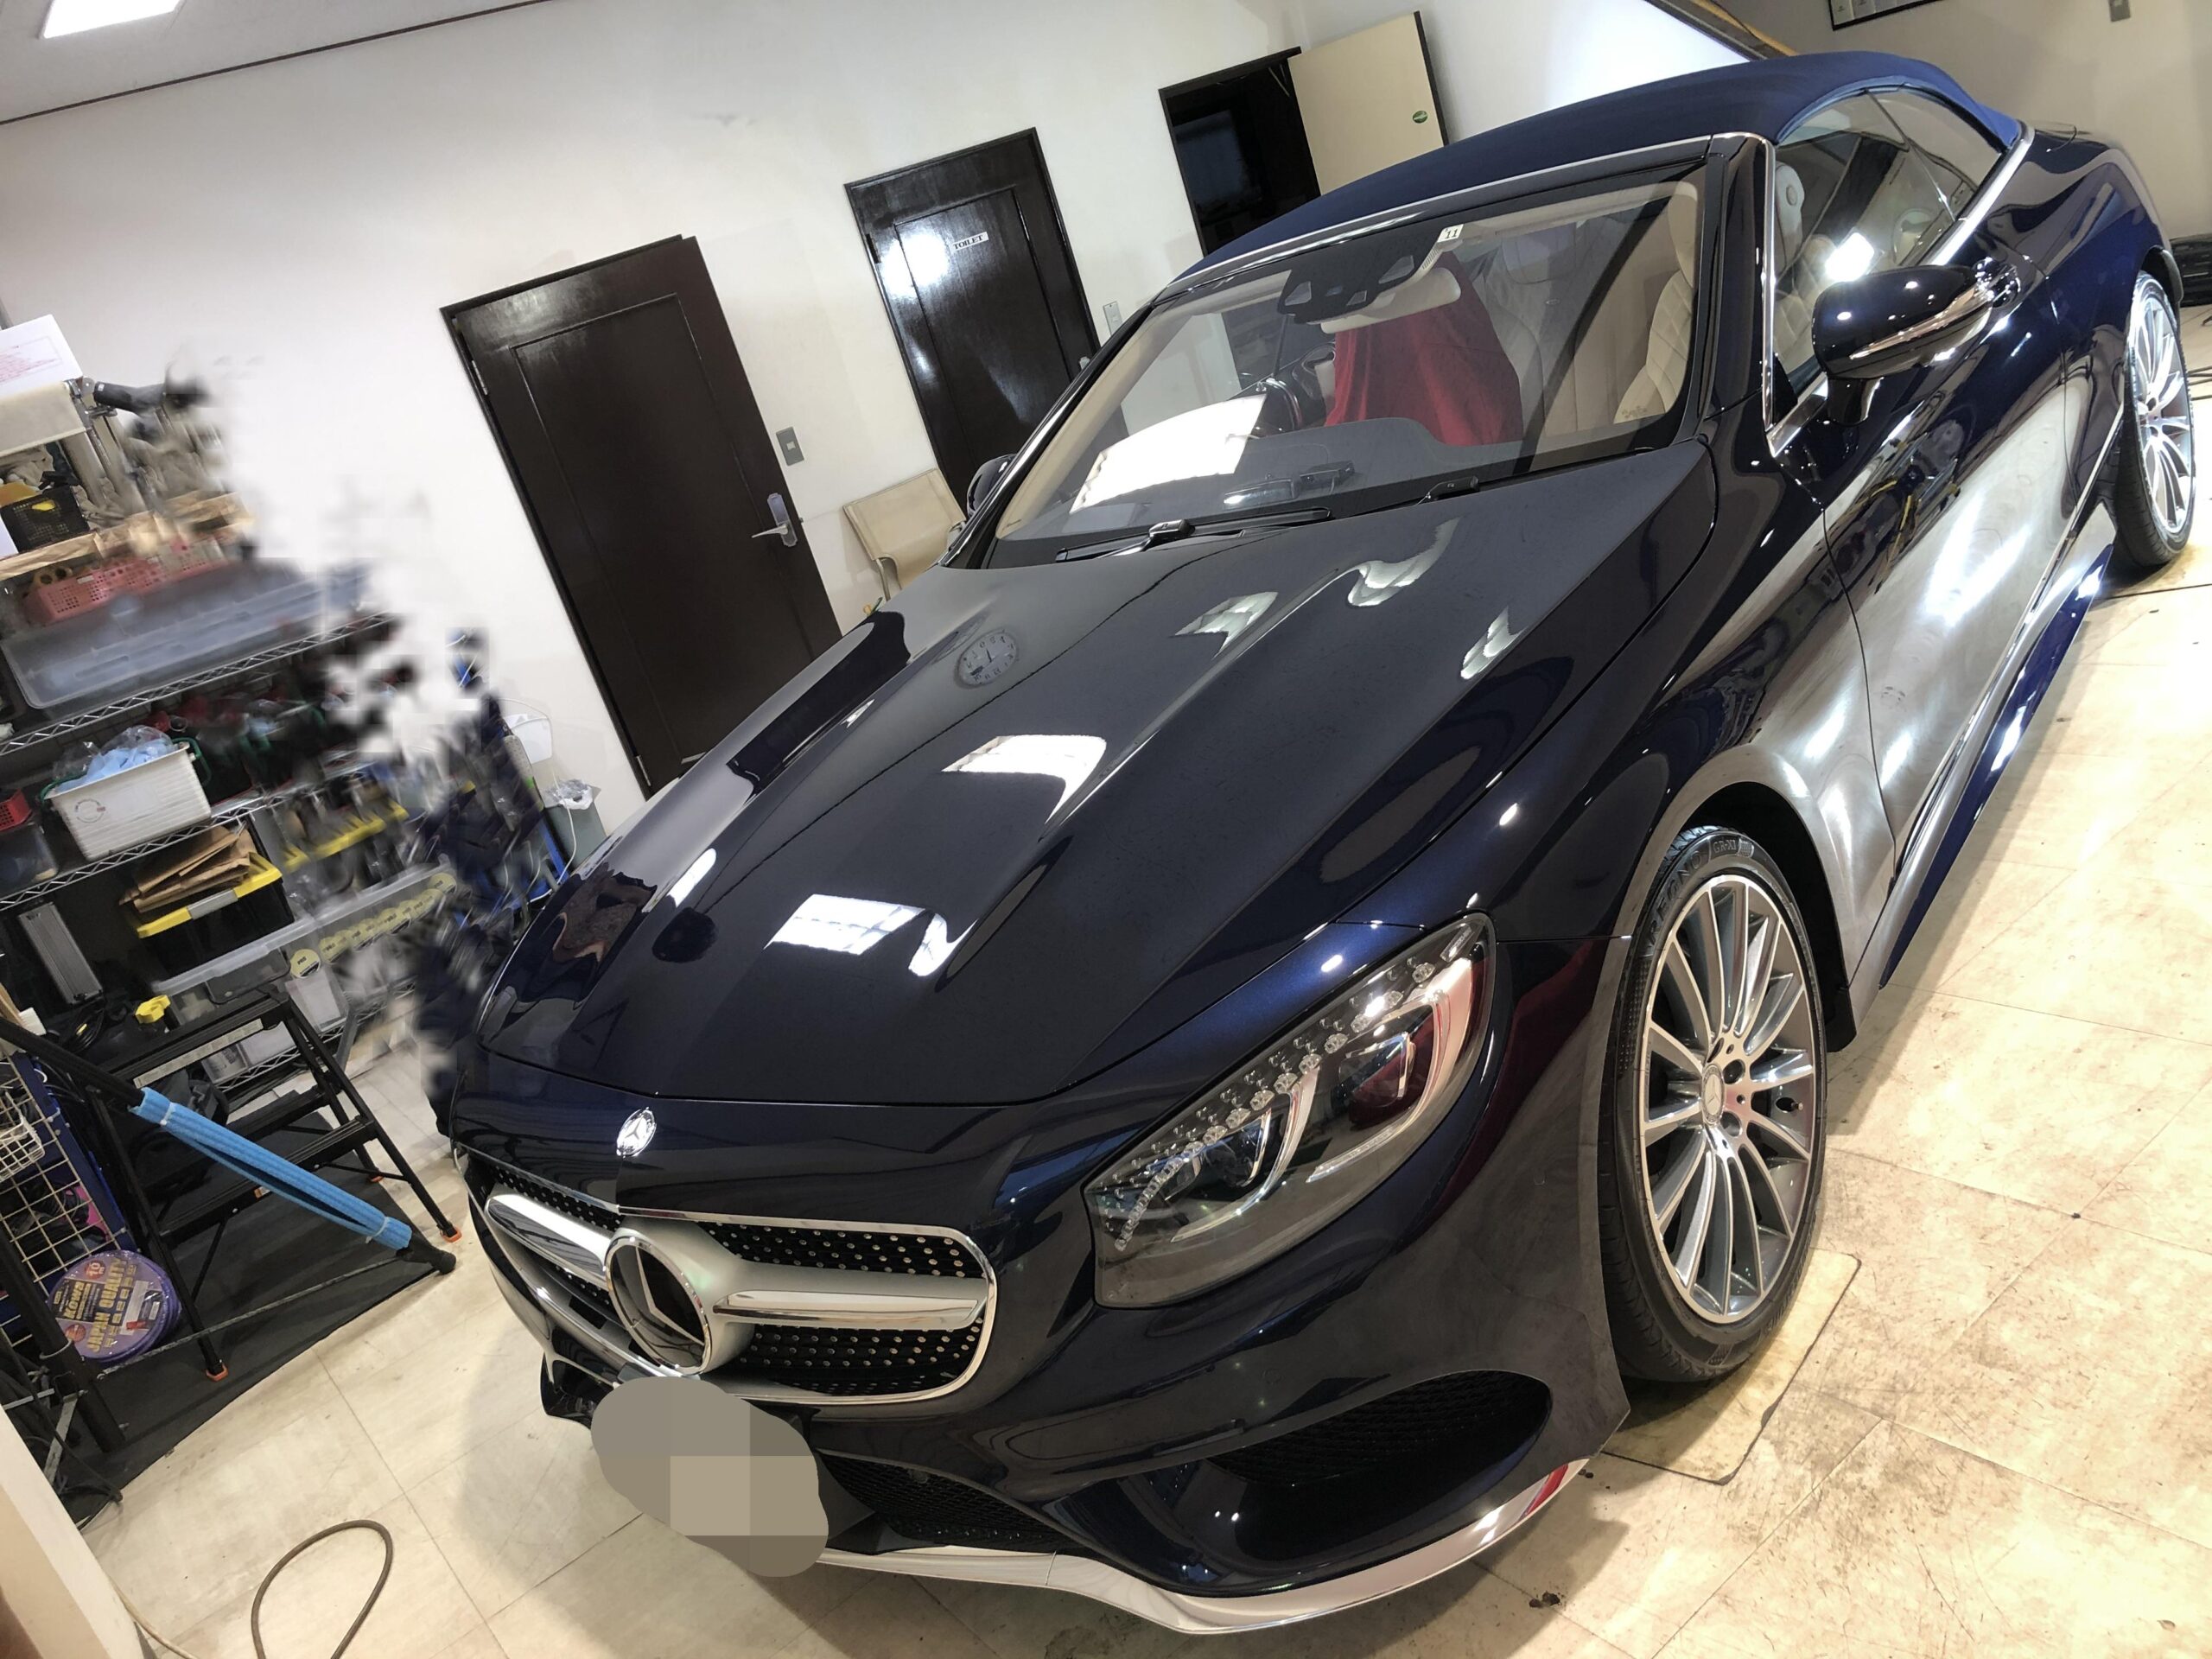 Mercedes Benz メルセデスベンツ S550coupe カブリオレ　F-Water coat施工